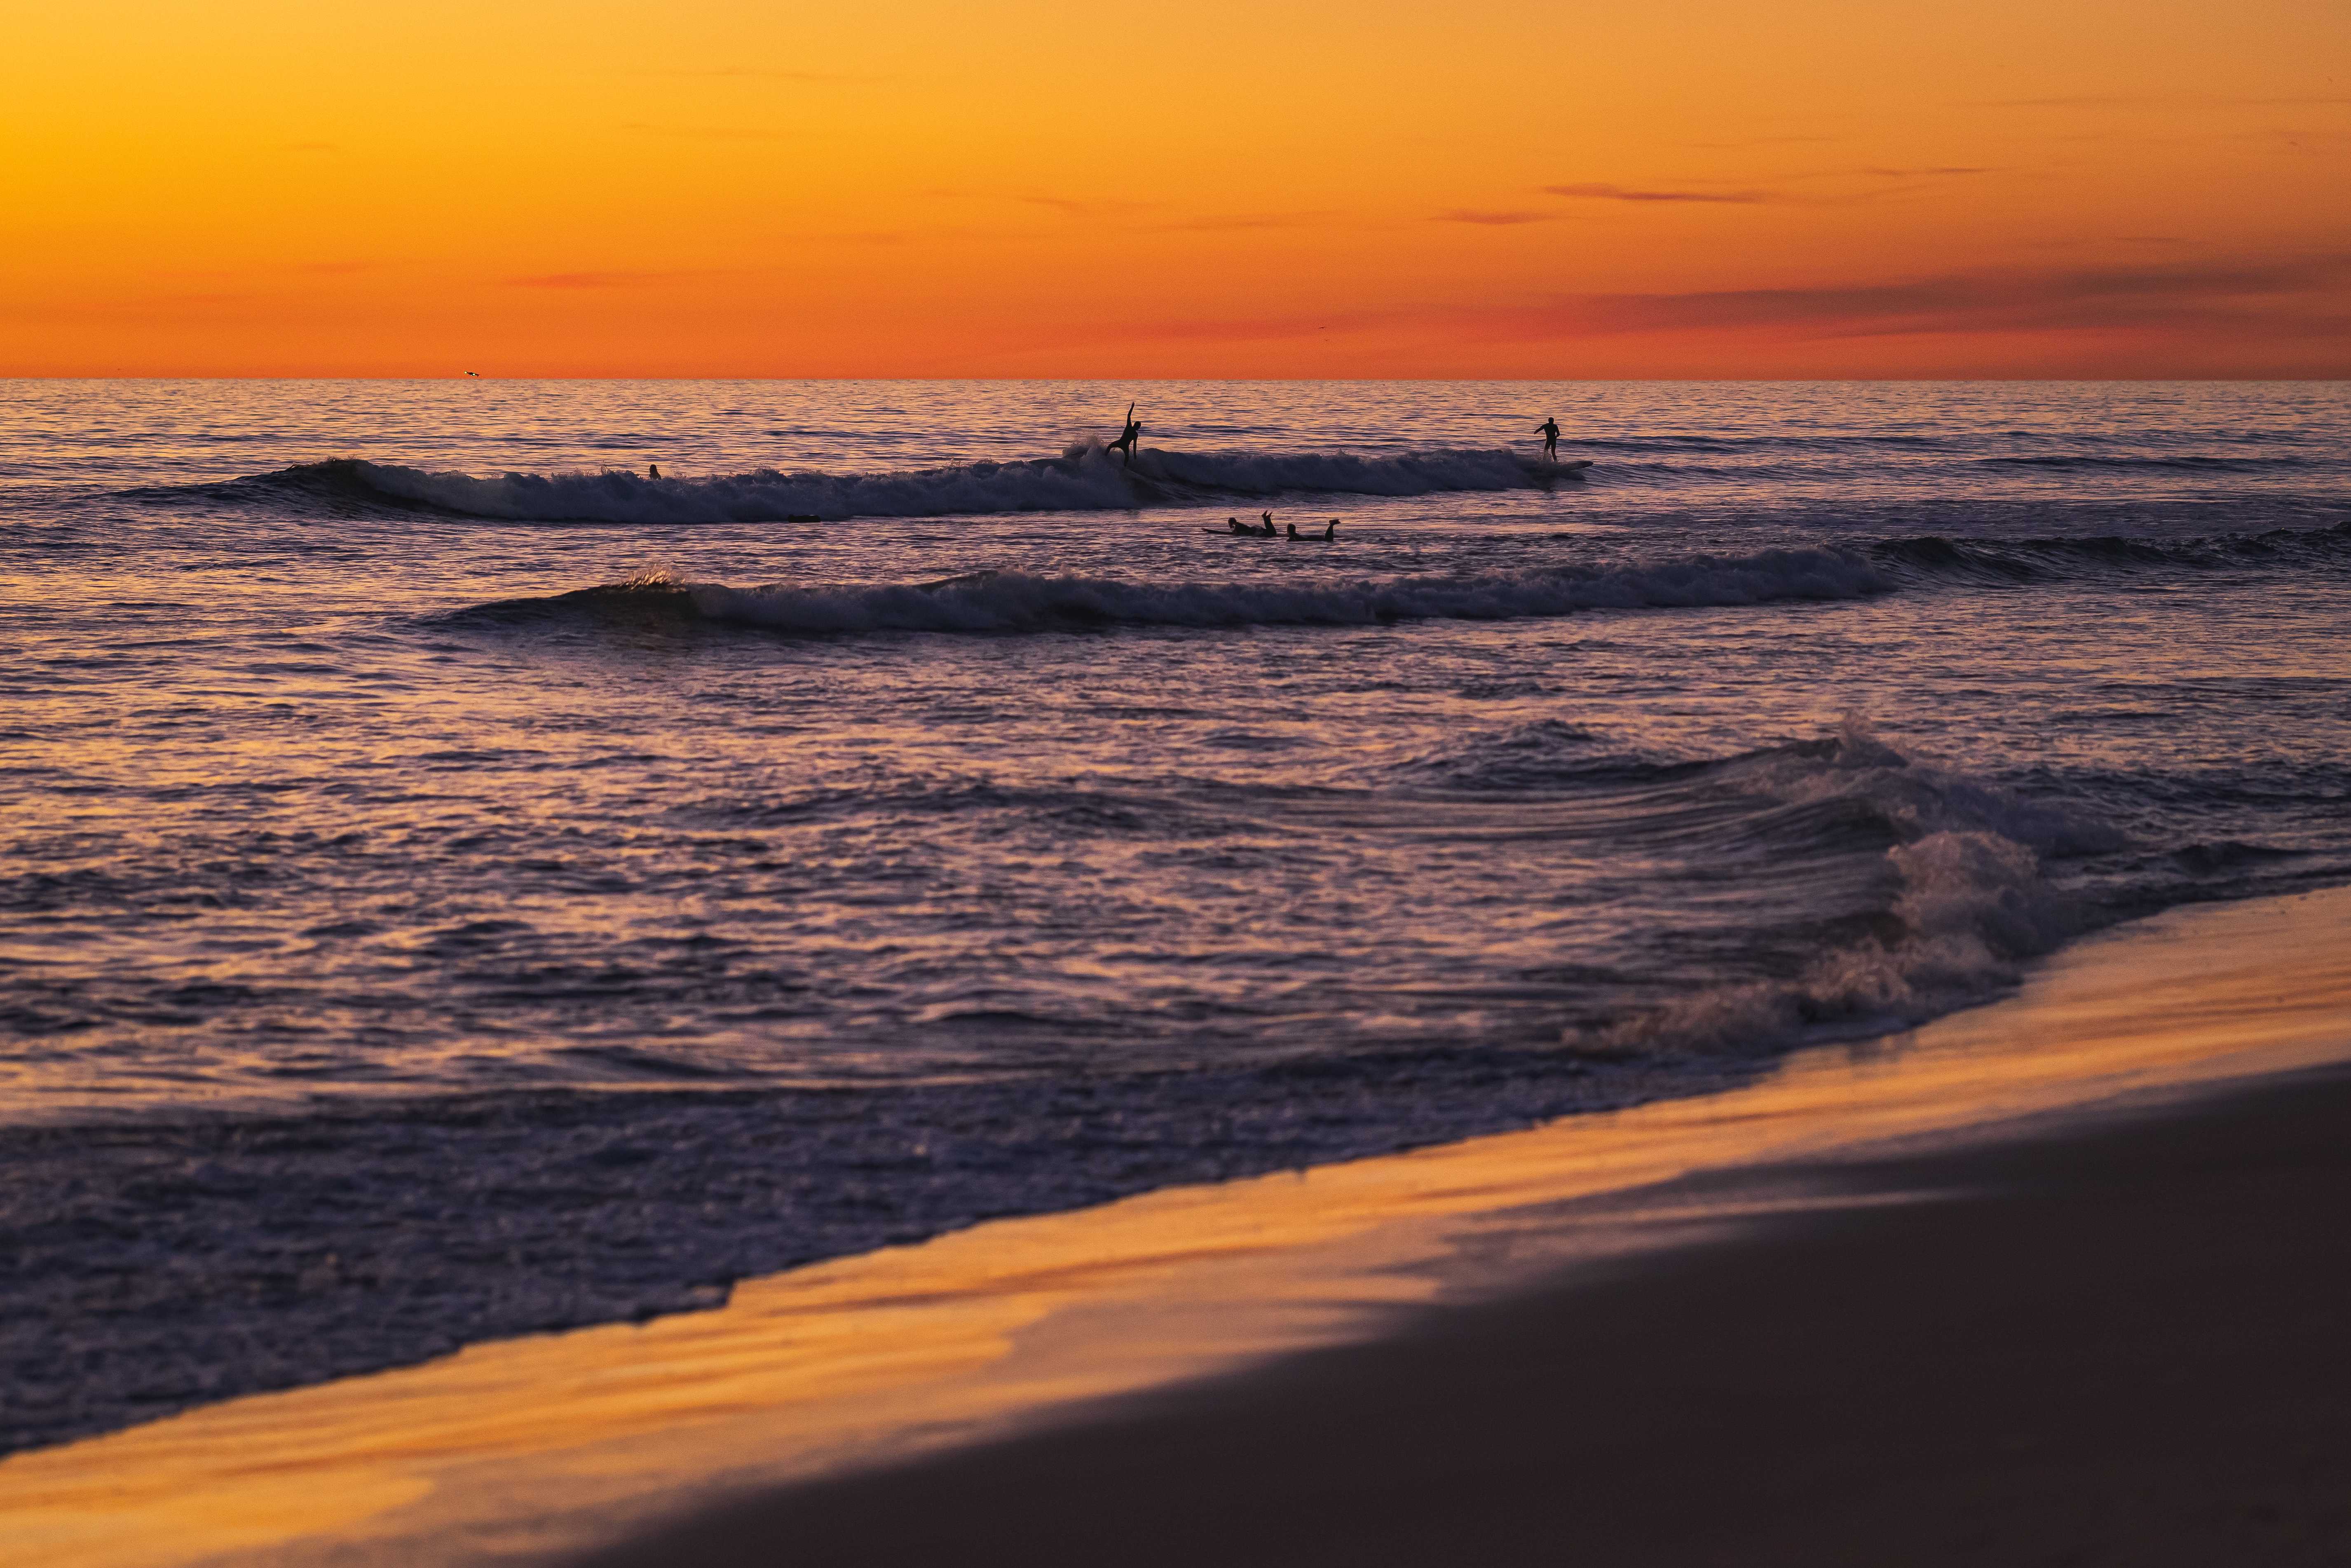 A deep orange and yellow sunset highlights a deep blue sea. Surfers are riding the last waves of the day.